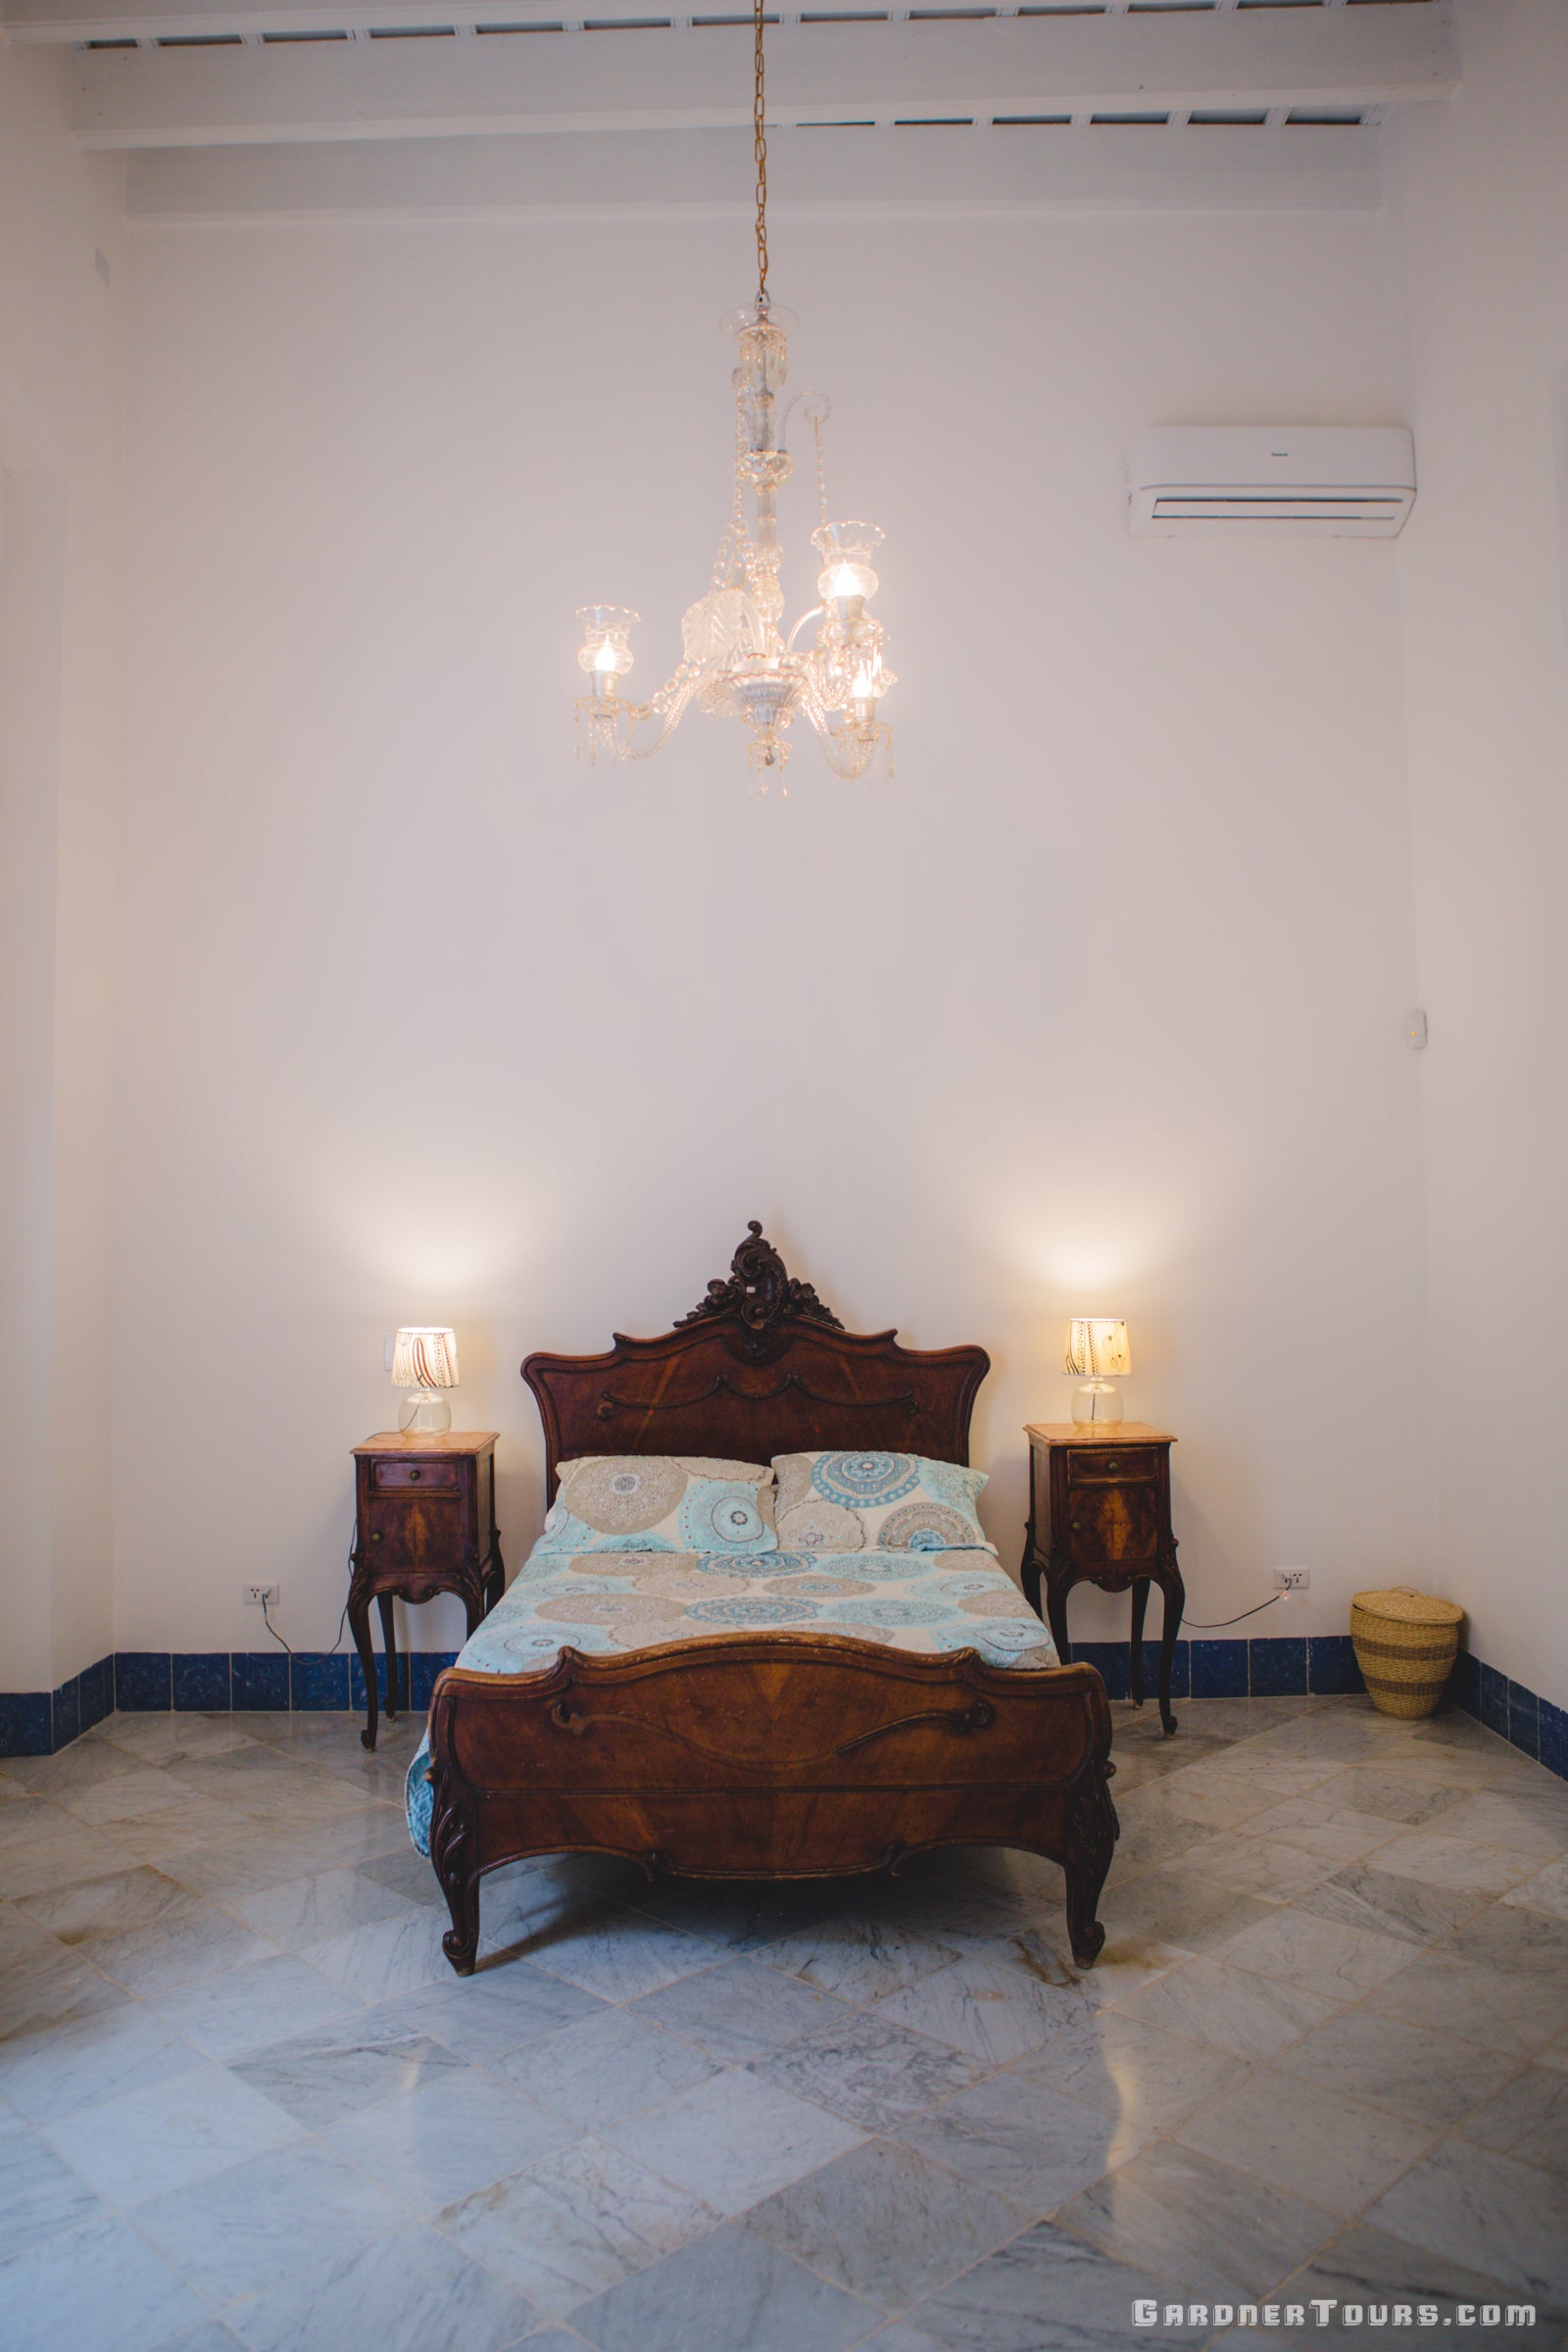 A 4-Star Luxury Bedroom in Classic BnB with Original Floor Plan and Large Rooms in Old Havana, Cuba